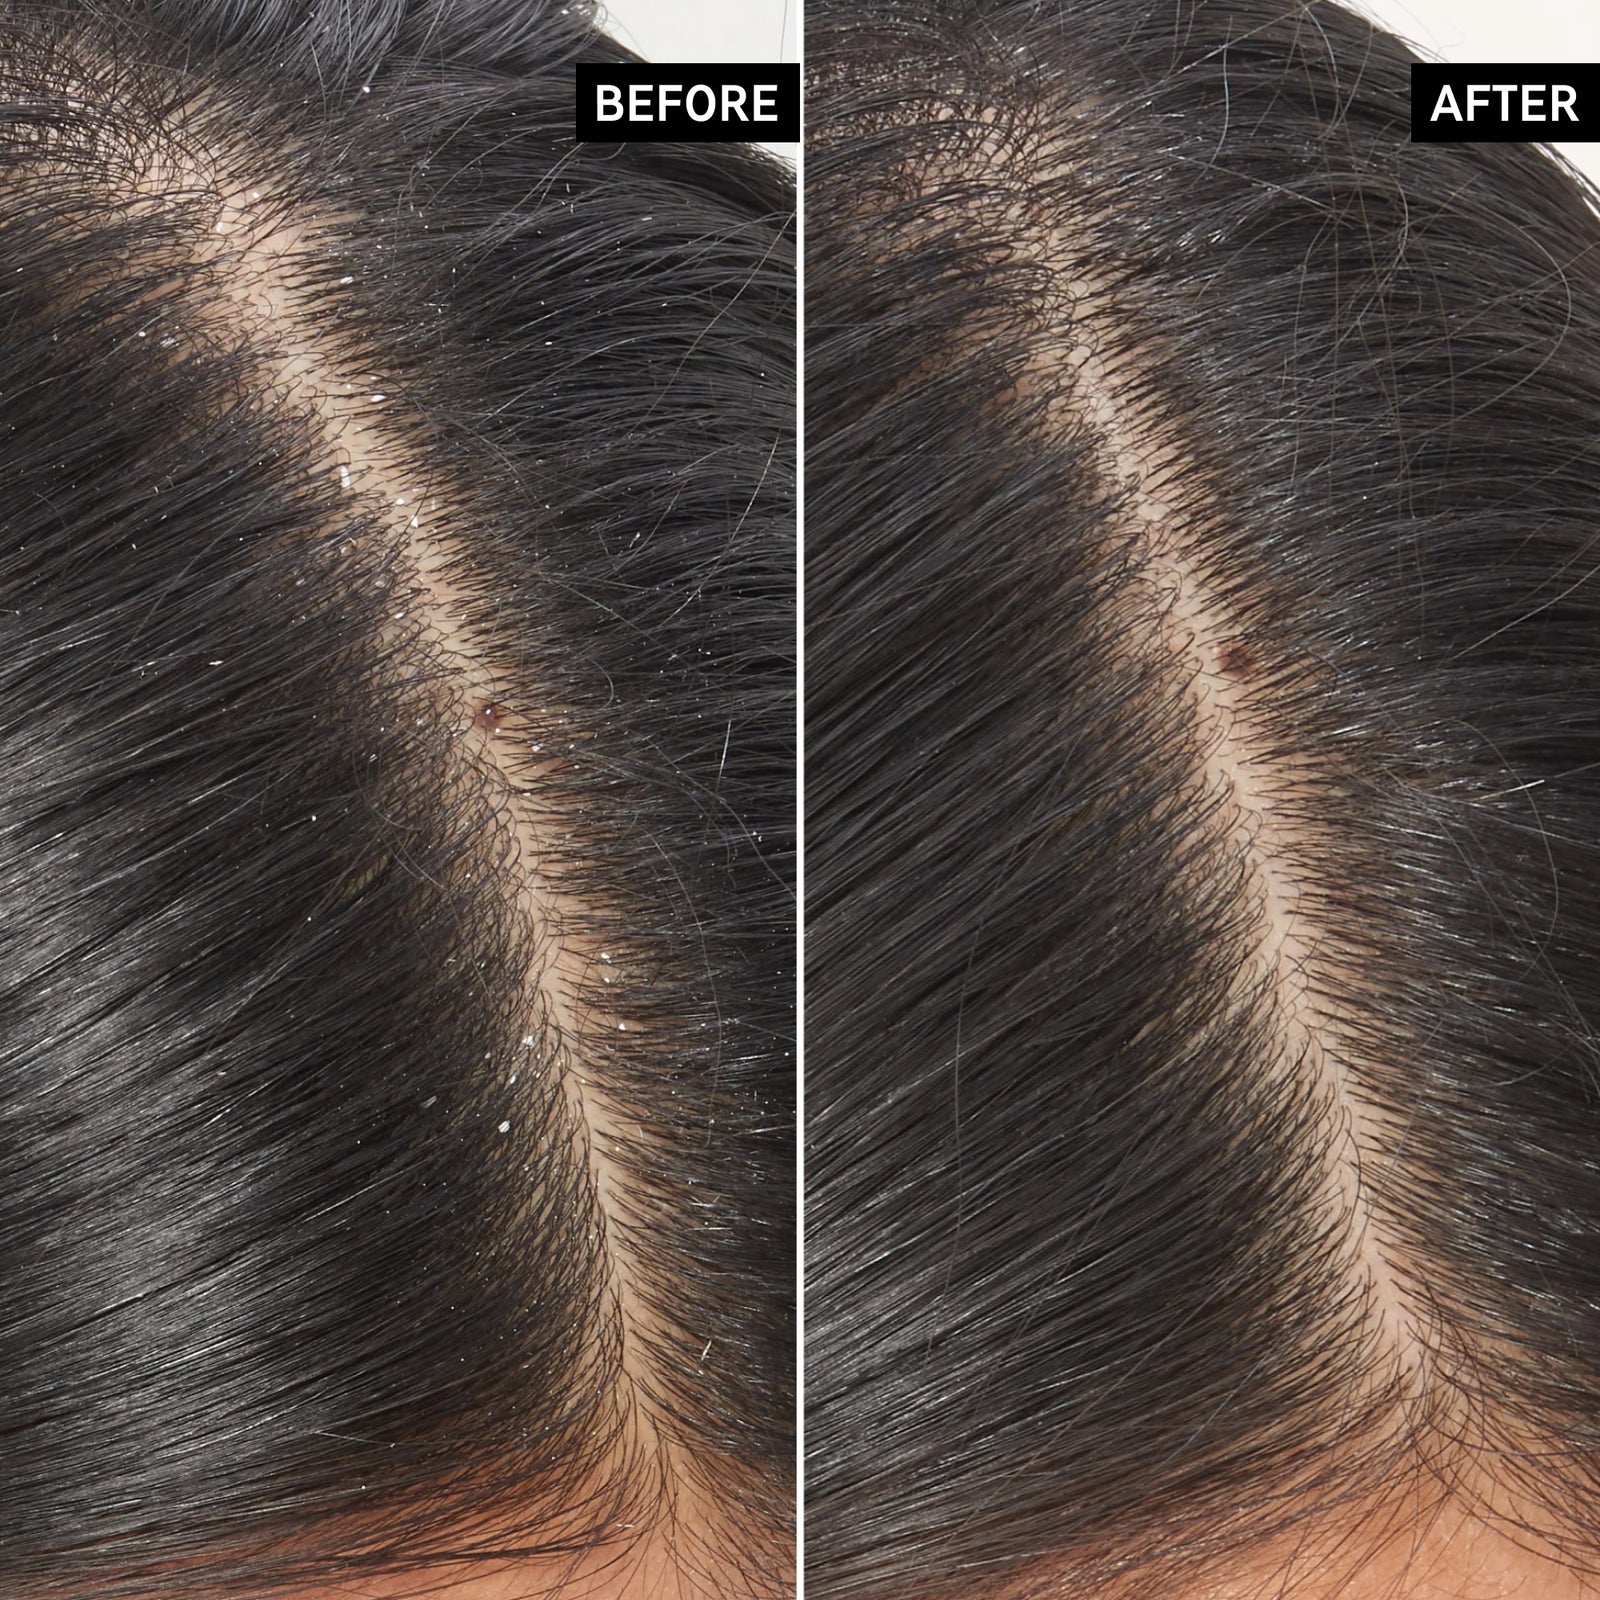 Before and after of using Salicylic Acid Scalp Treatment